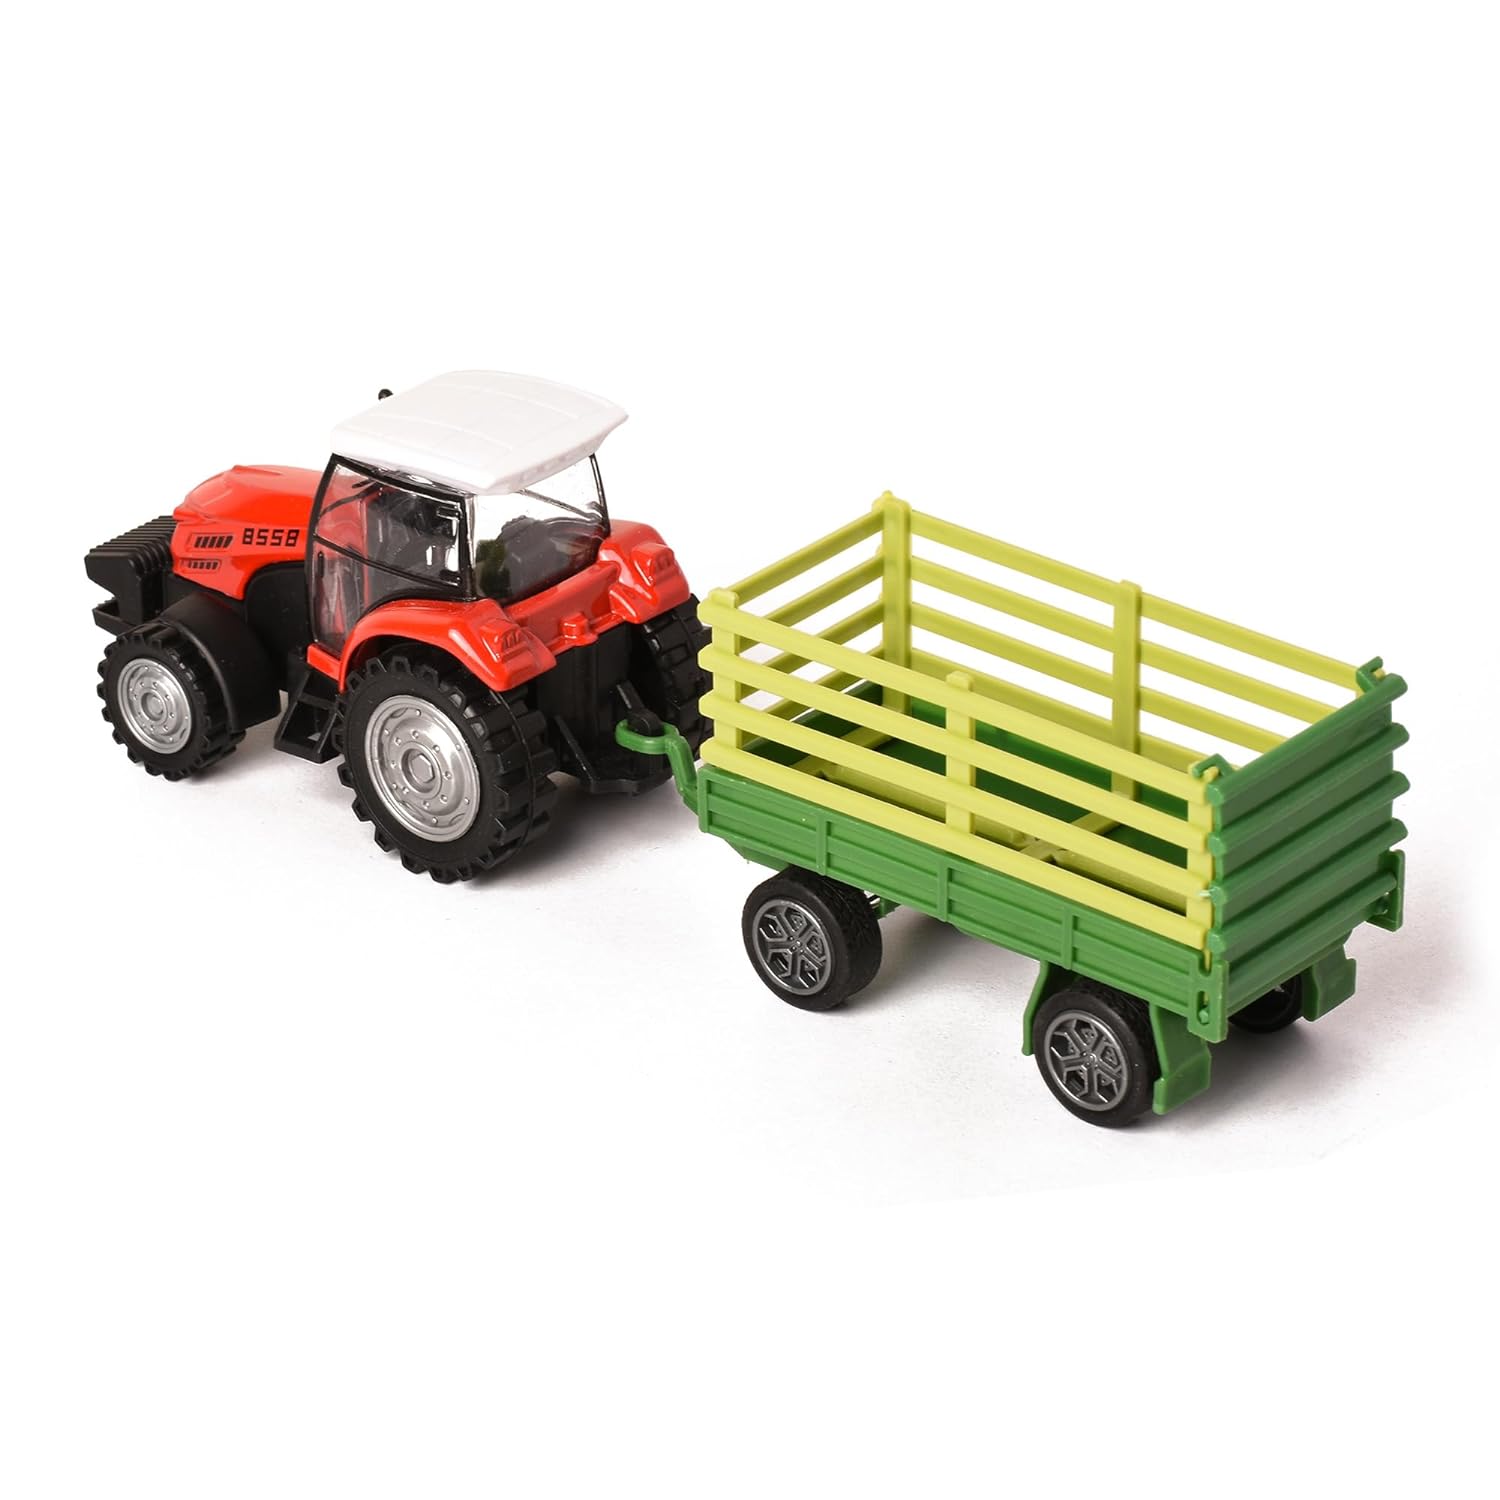 Braintastic Pull Back Inertia Vehicles Farm Tractor with Trolley Truck Agriculture Farm Friction Power Toy for Kids Age 3+ Years Design